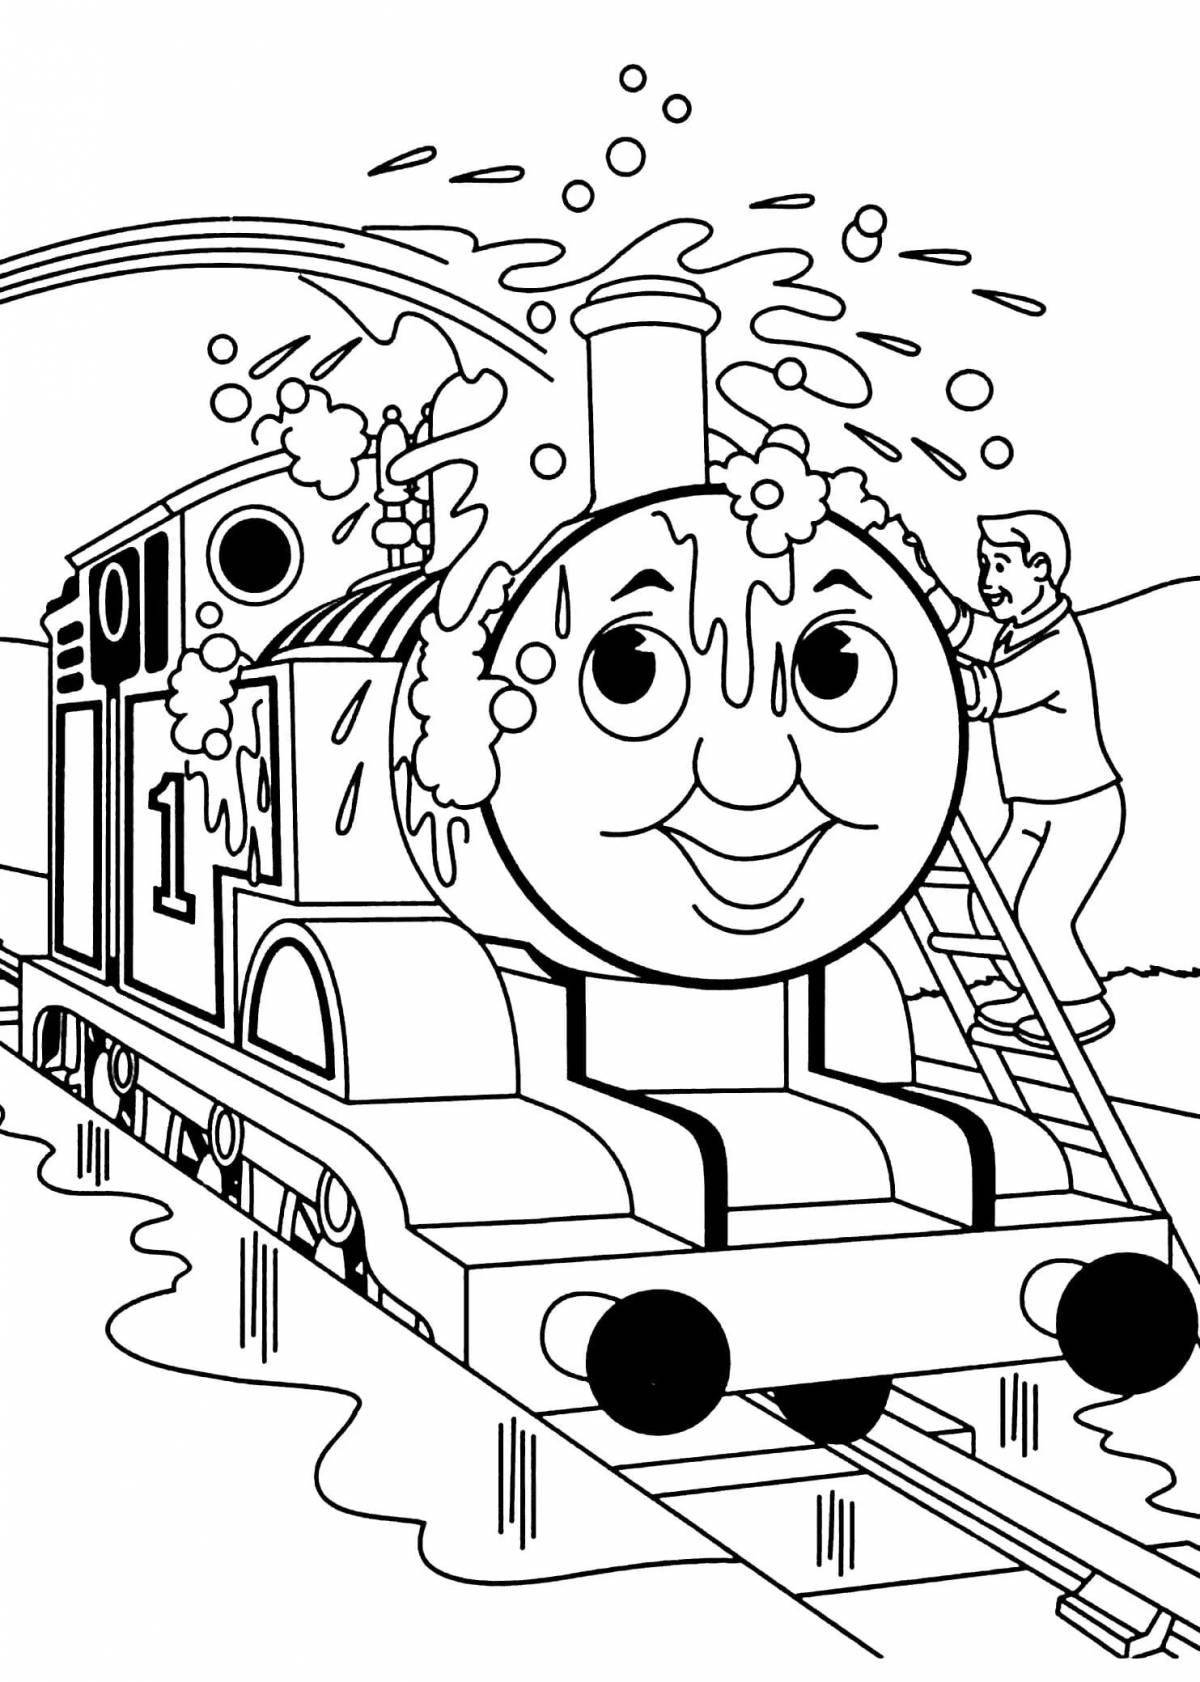 Thomas the Tank Engine coloring pages for kids